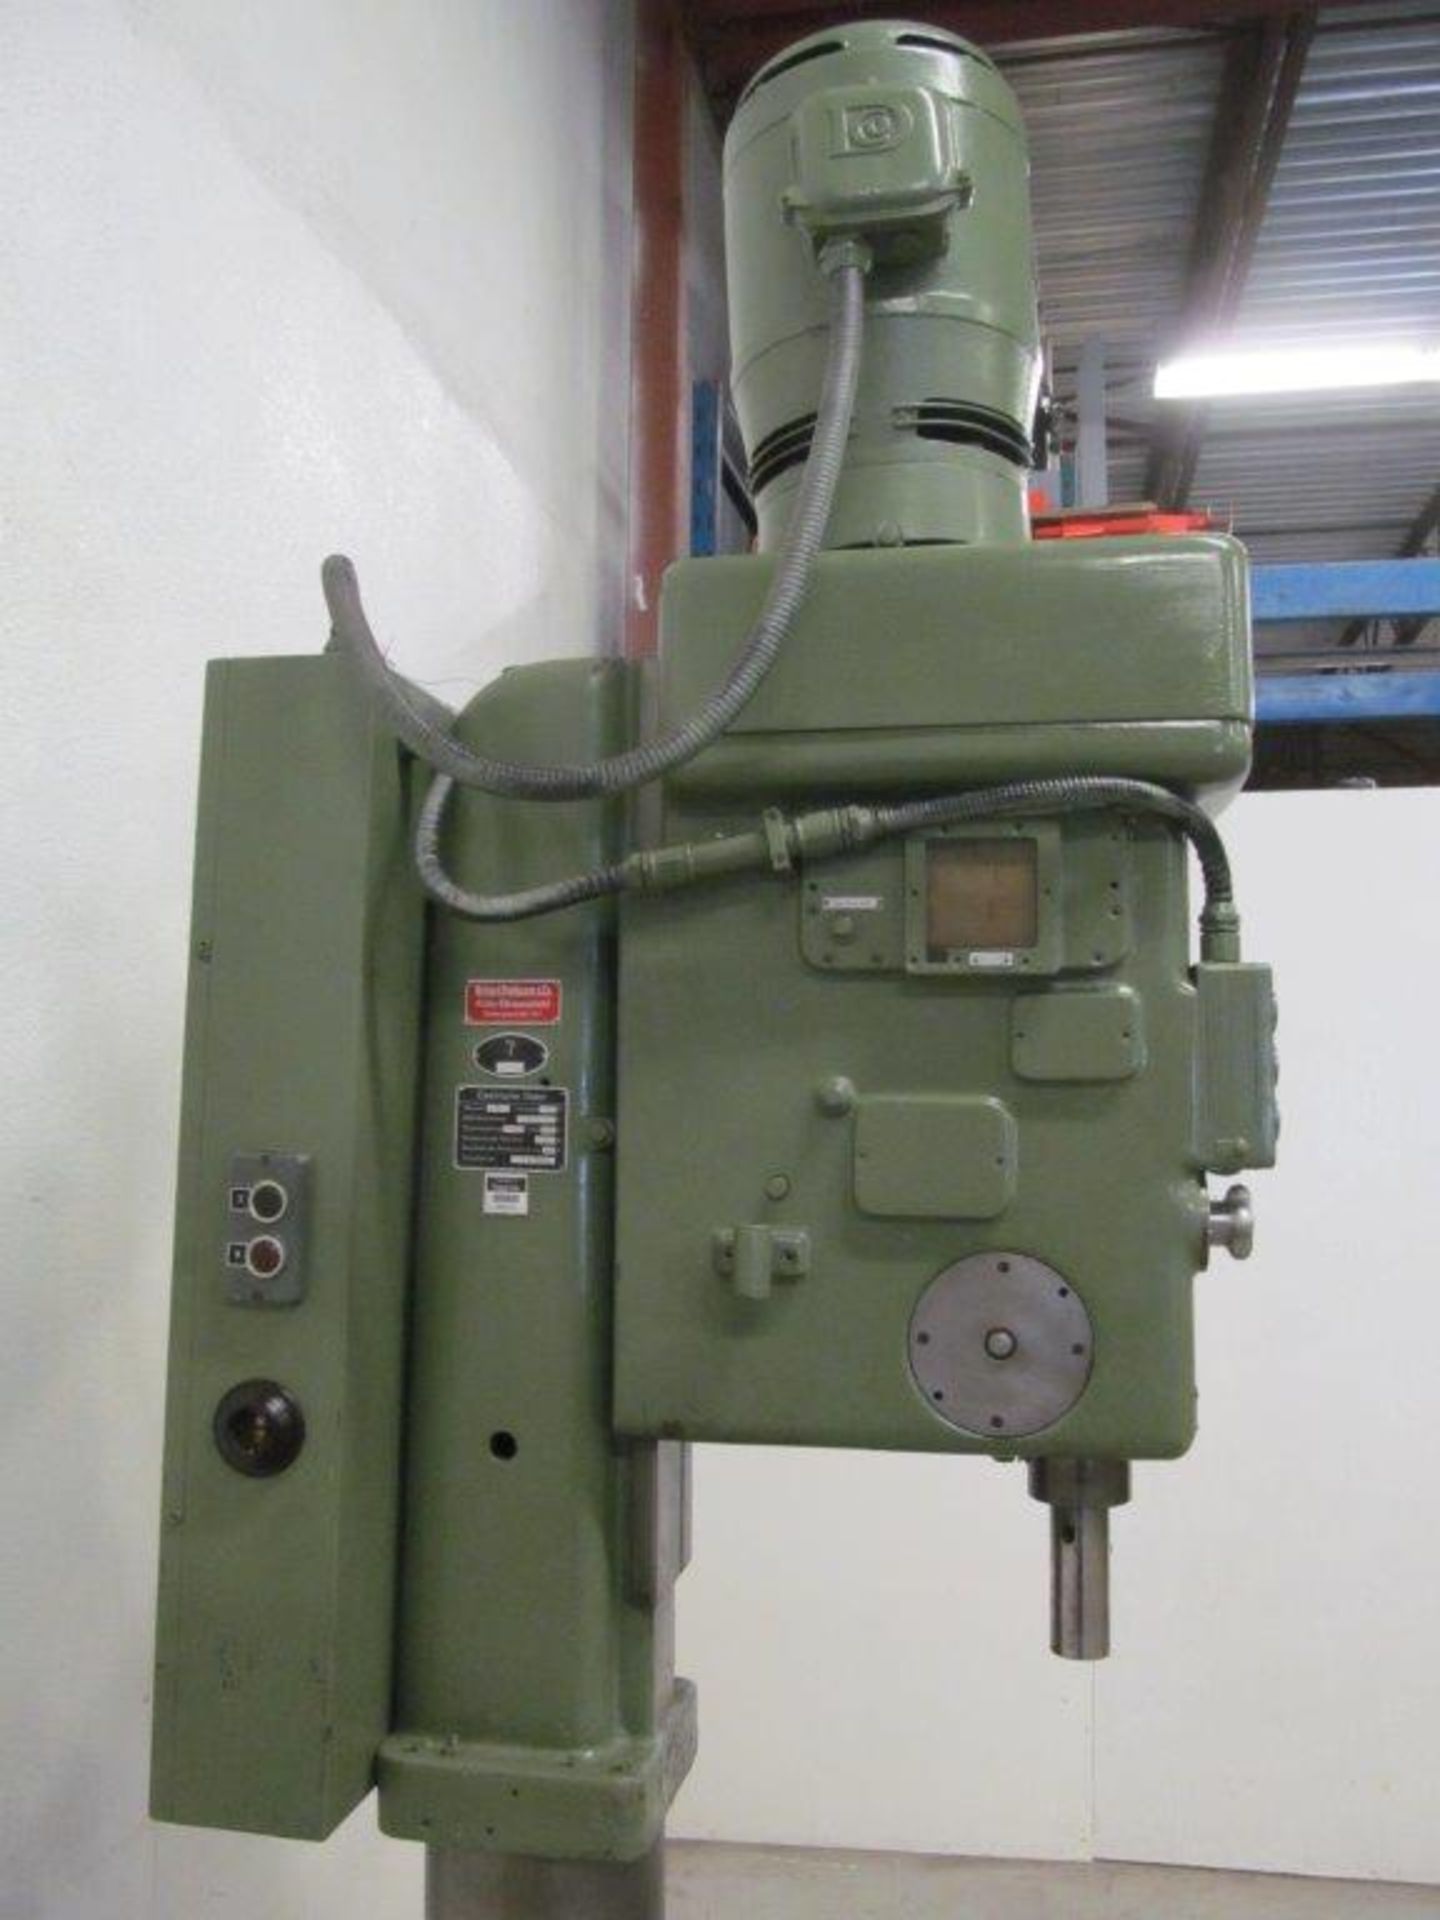 WEBO (GERMANY) HEAVY DUTY GEARED HEAD DRILL PRESS MT4 SPINDLE 1 9/16'' DRILLING CAPACITY, ELECTRICS: - Image 3 of 9